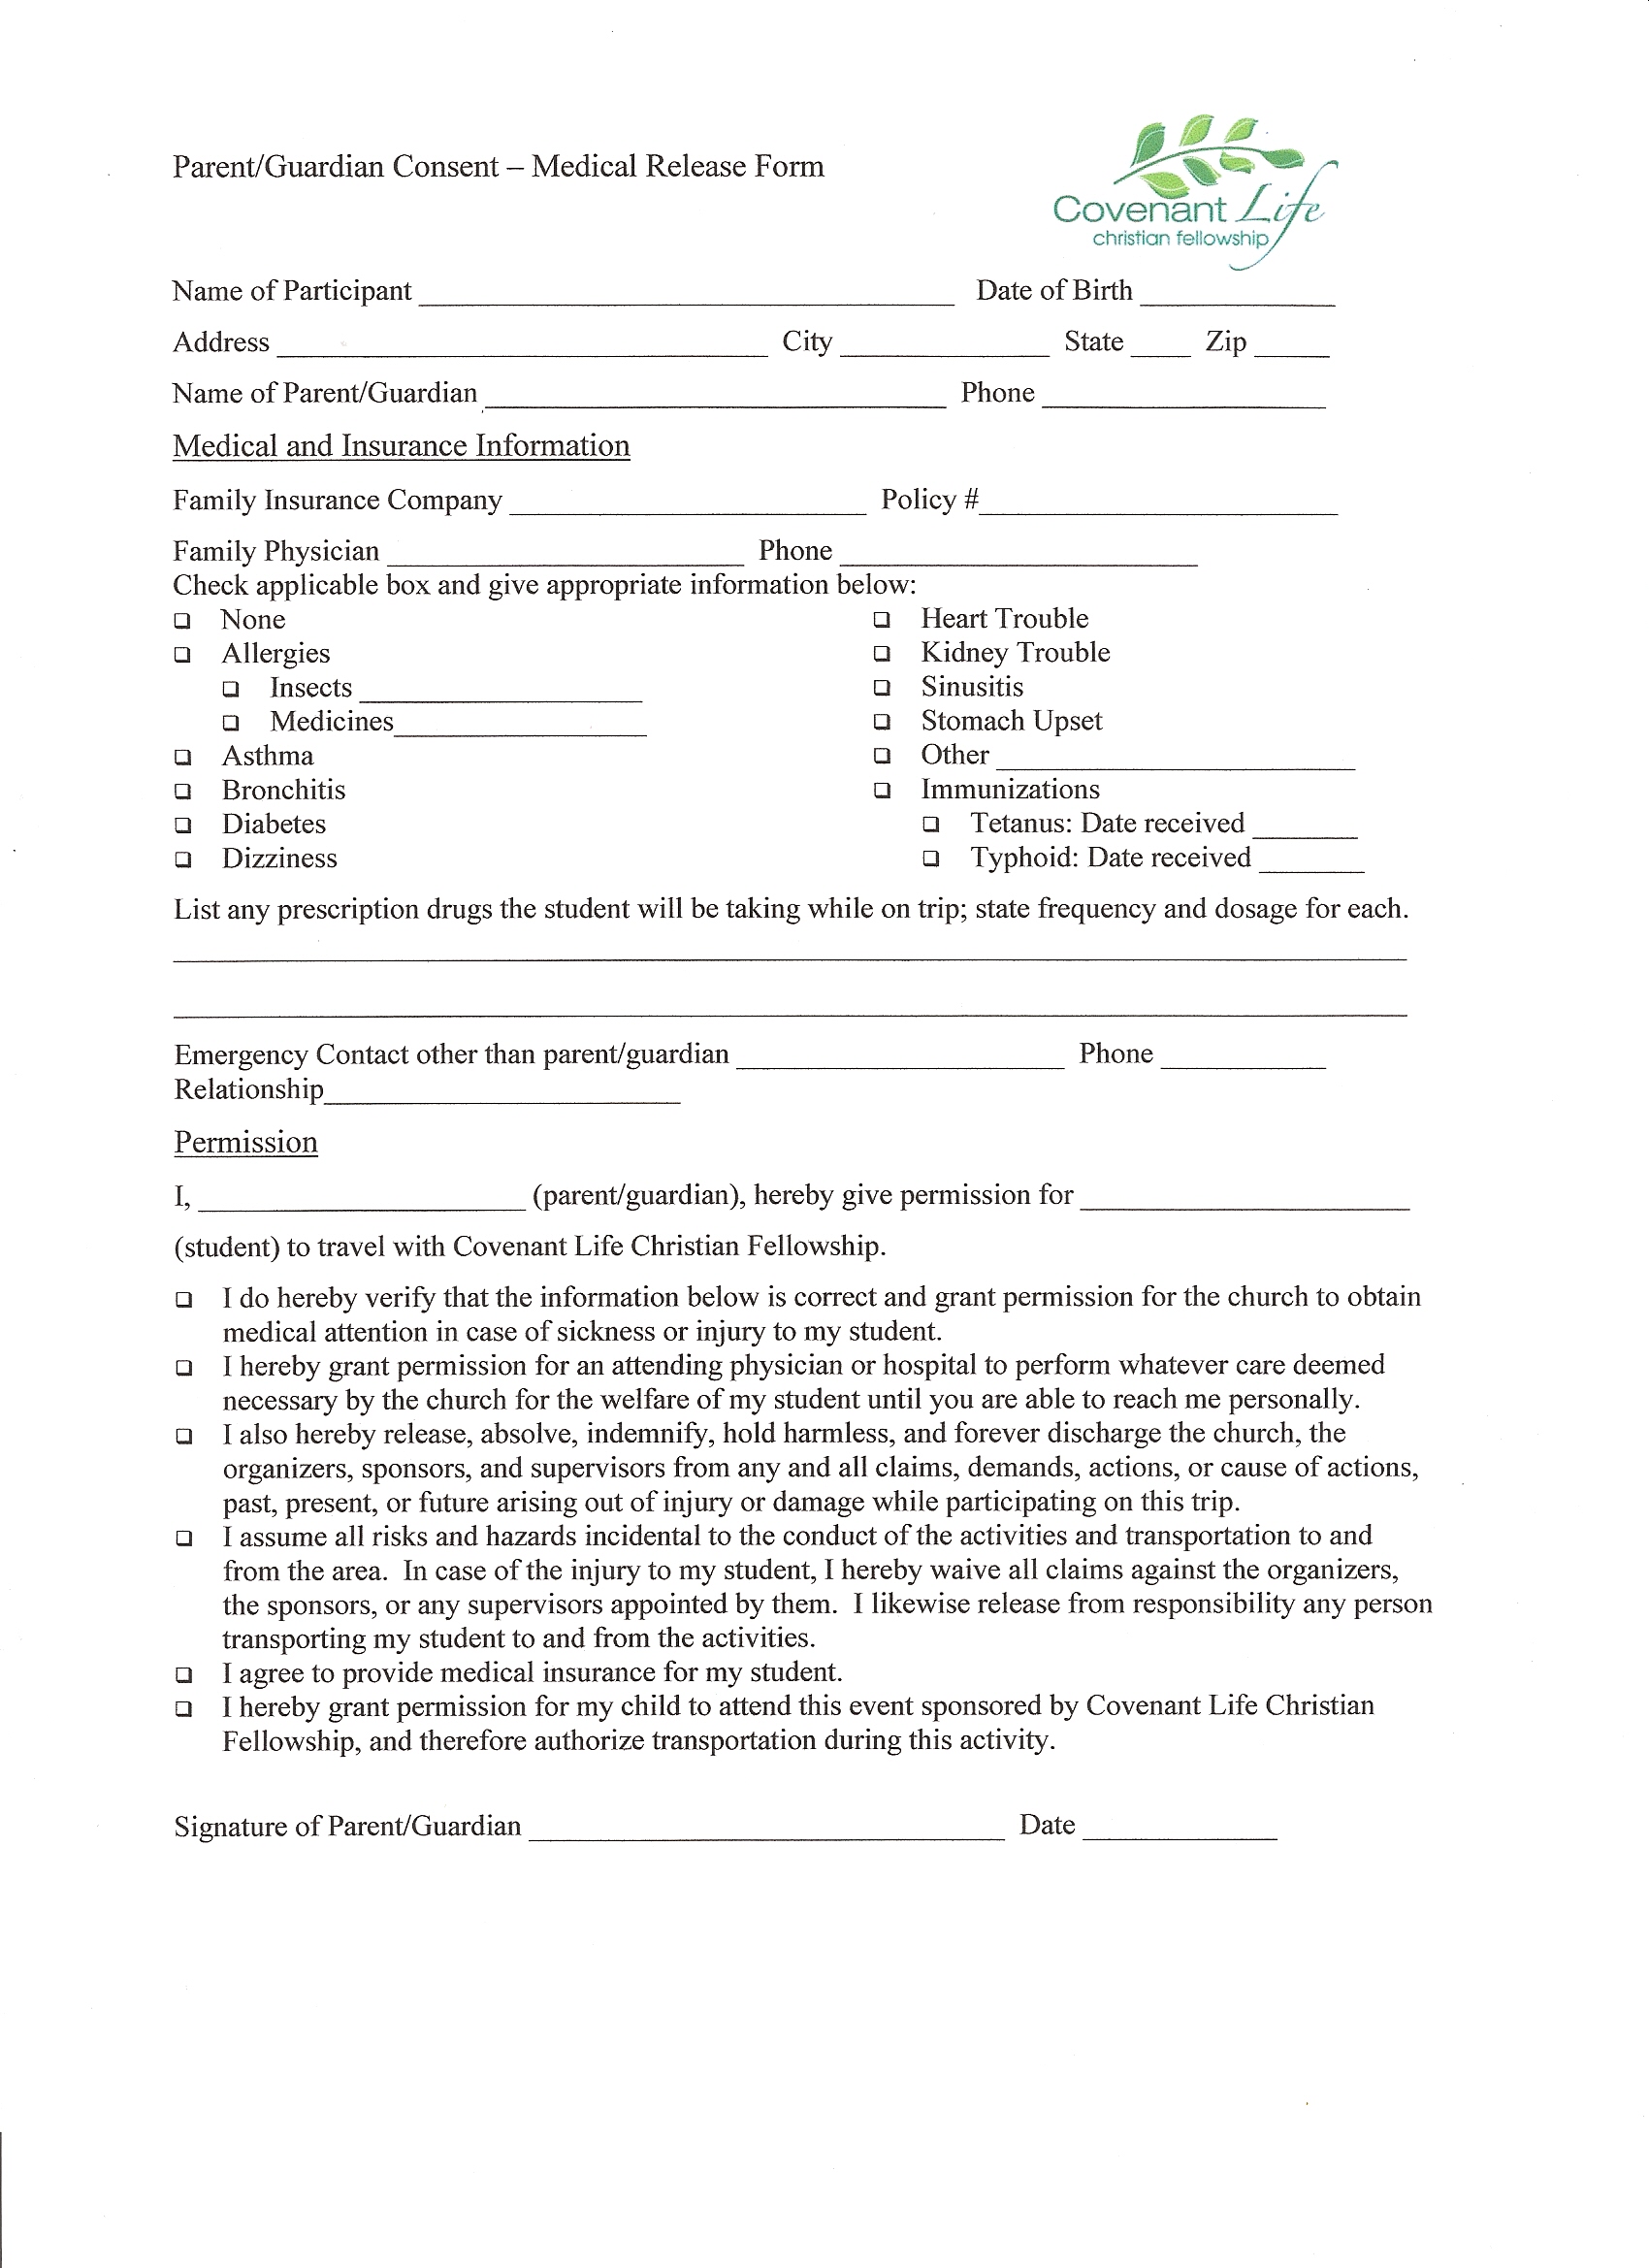 medical-release-form-templates-free-printable